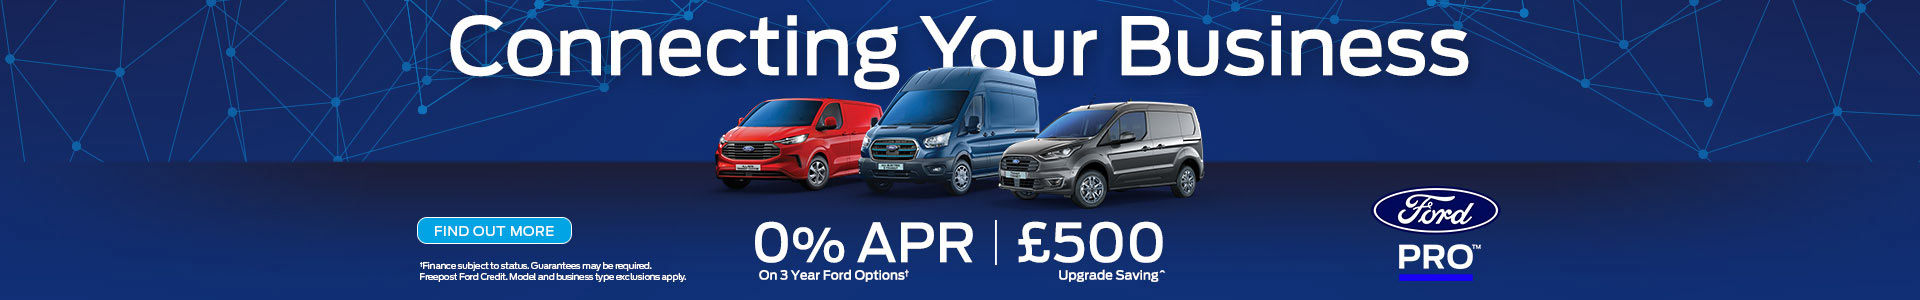 Connecting Your Business. Two great deals on New Ford Vans.